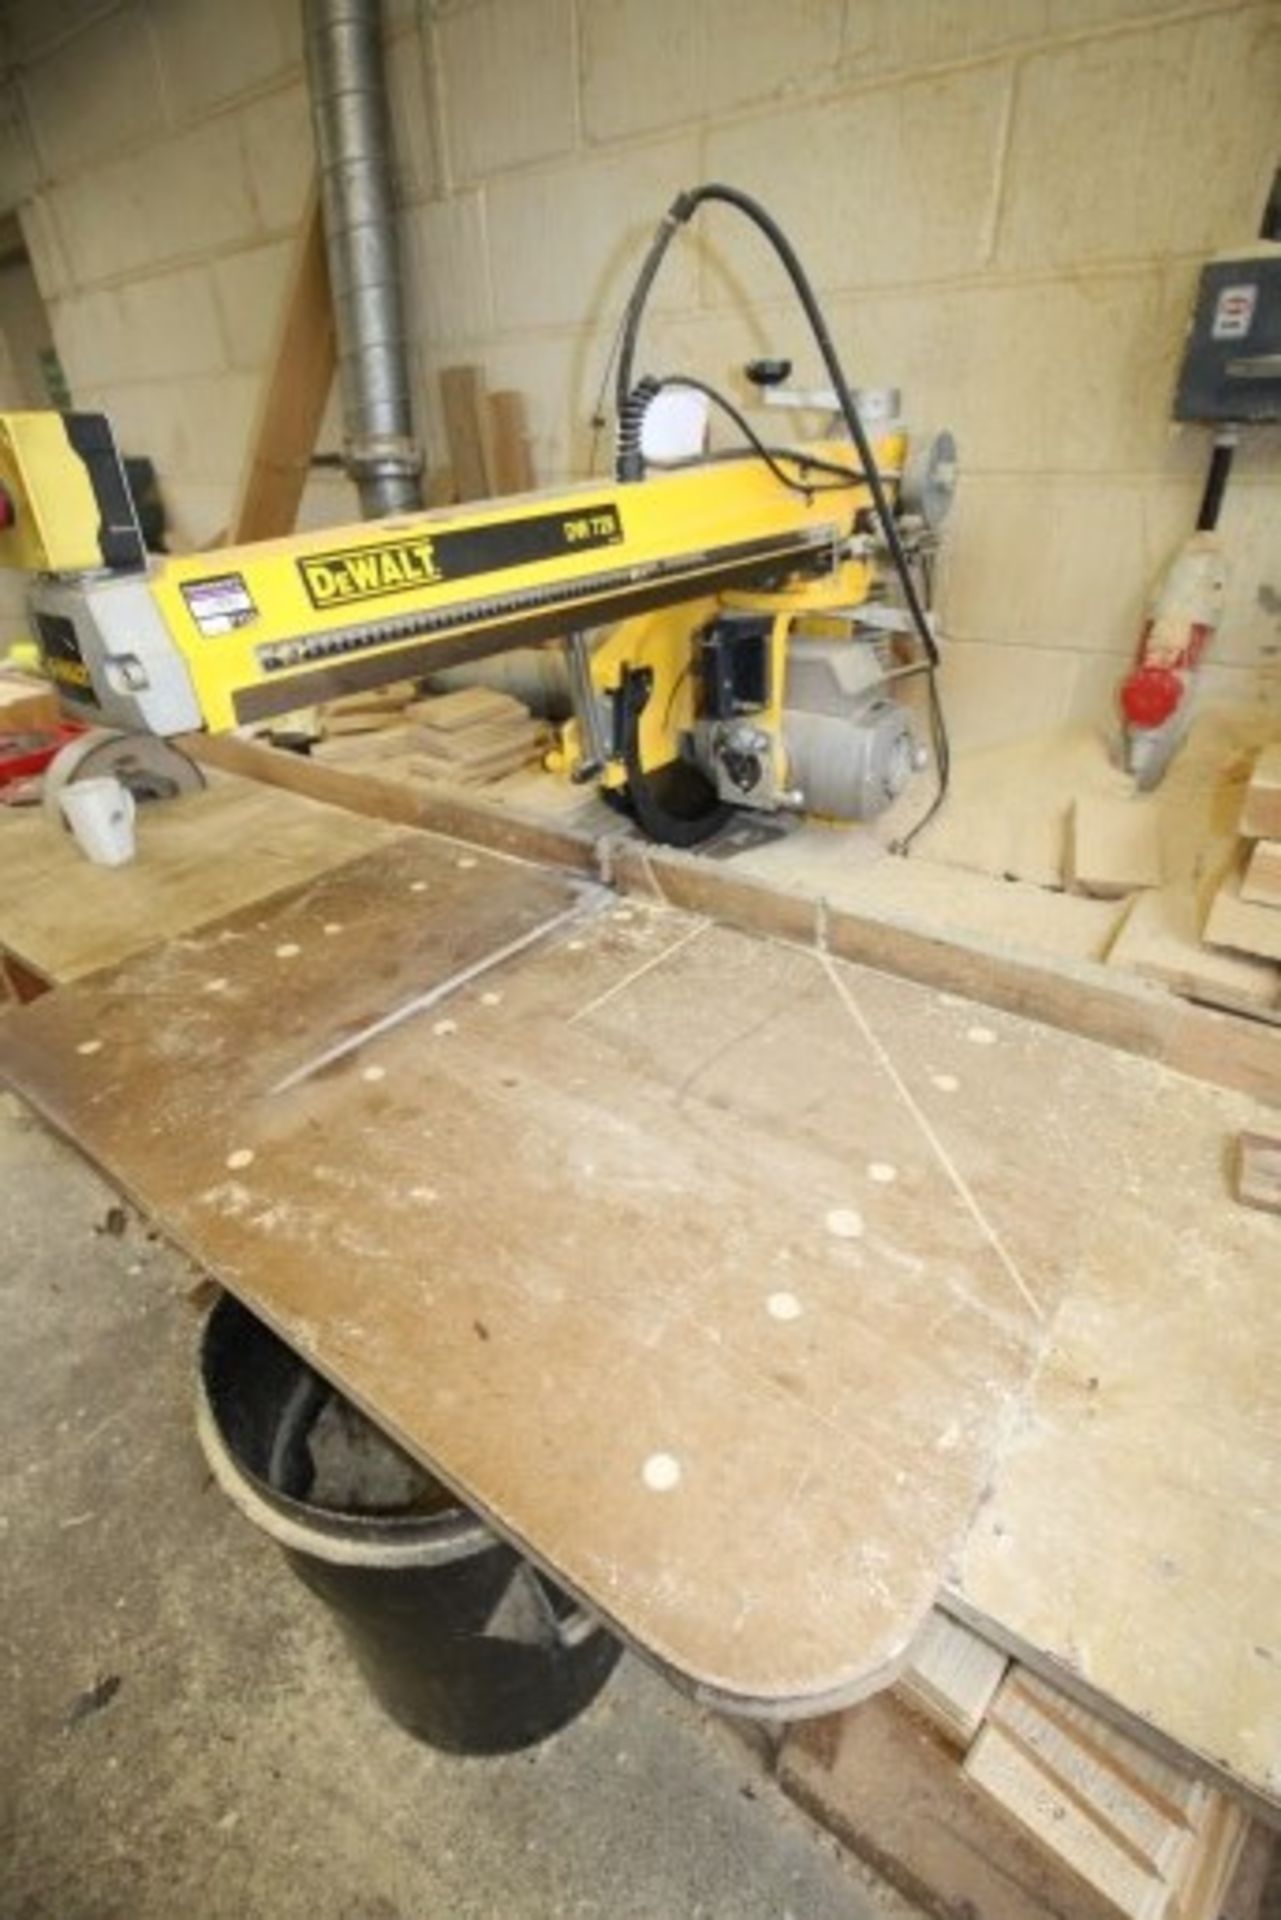 FLOOR STANDING DEWALT DW729 CROSS CUT SAW, SERIAL NUMBER 00068, TYPE A2, 3-PHASE ELECTRIC - Image 2 of 2